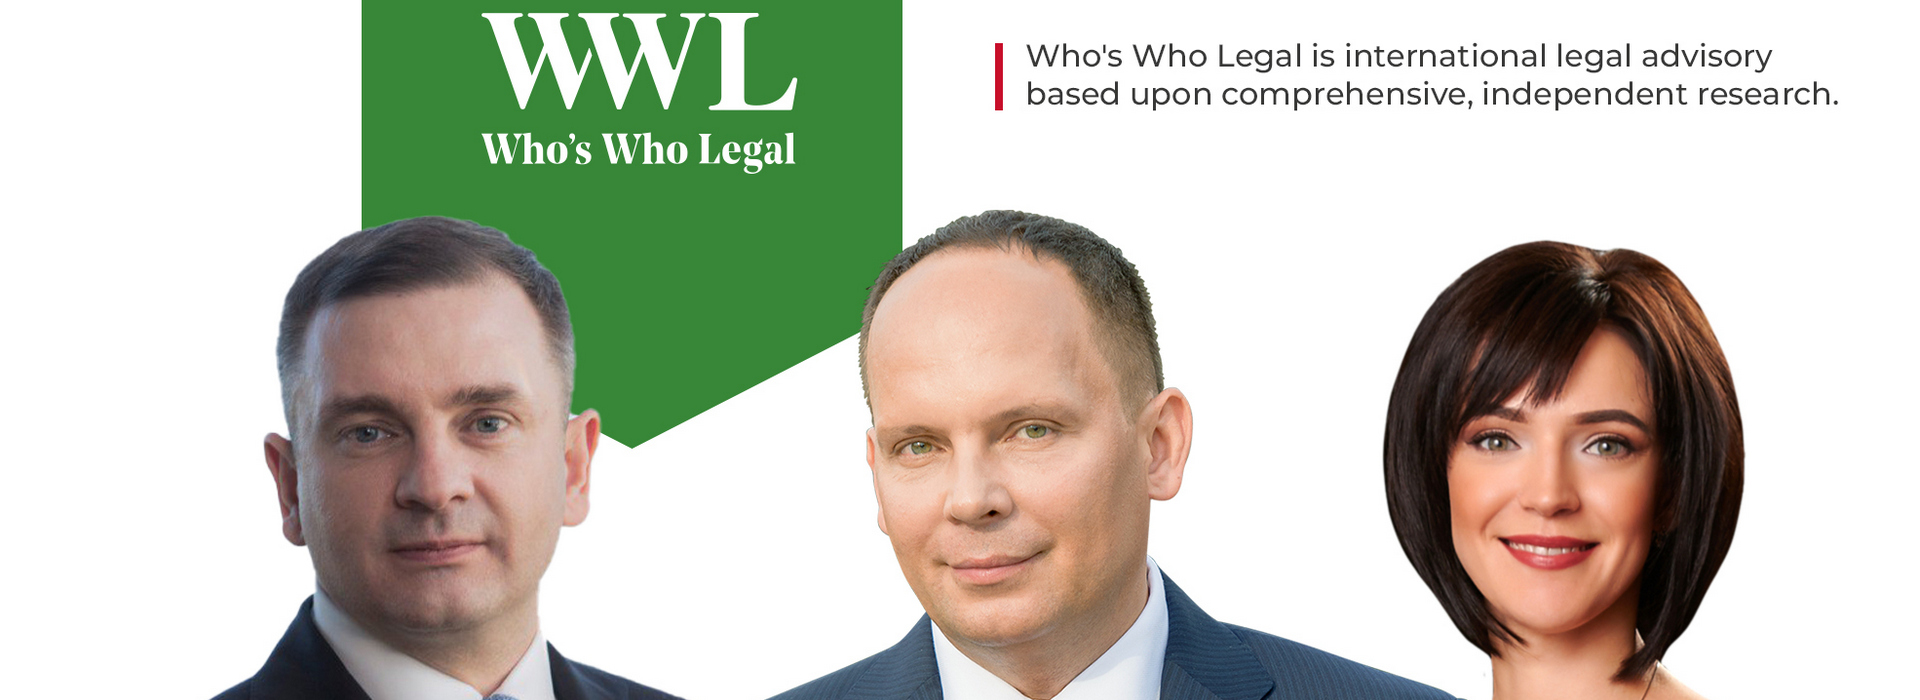 GOLAW Lawyers Have Been Highly Recognised by International Legal Advisory Who’s Who Legal